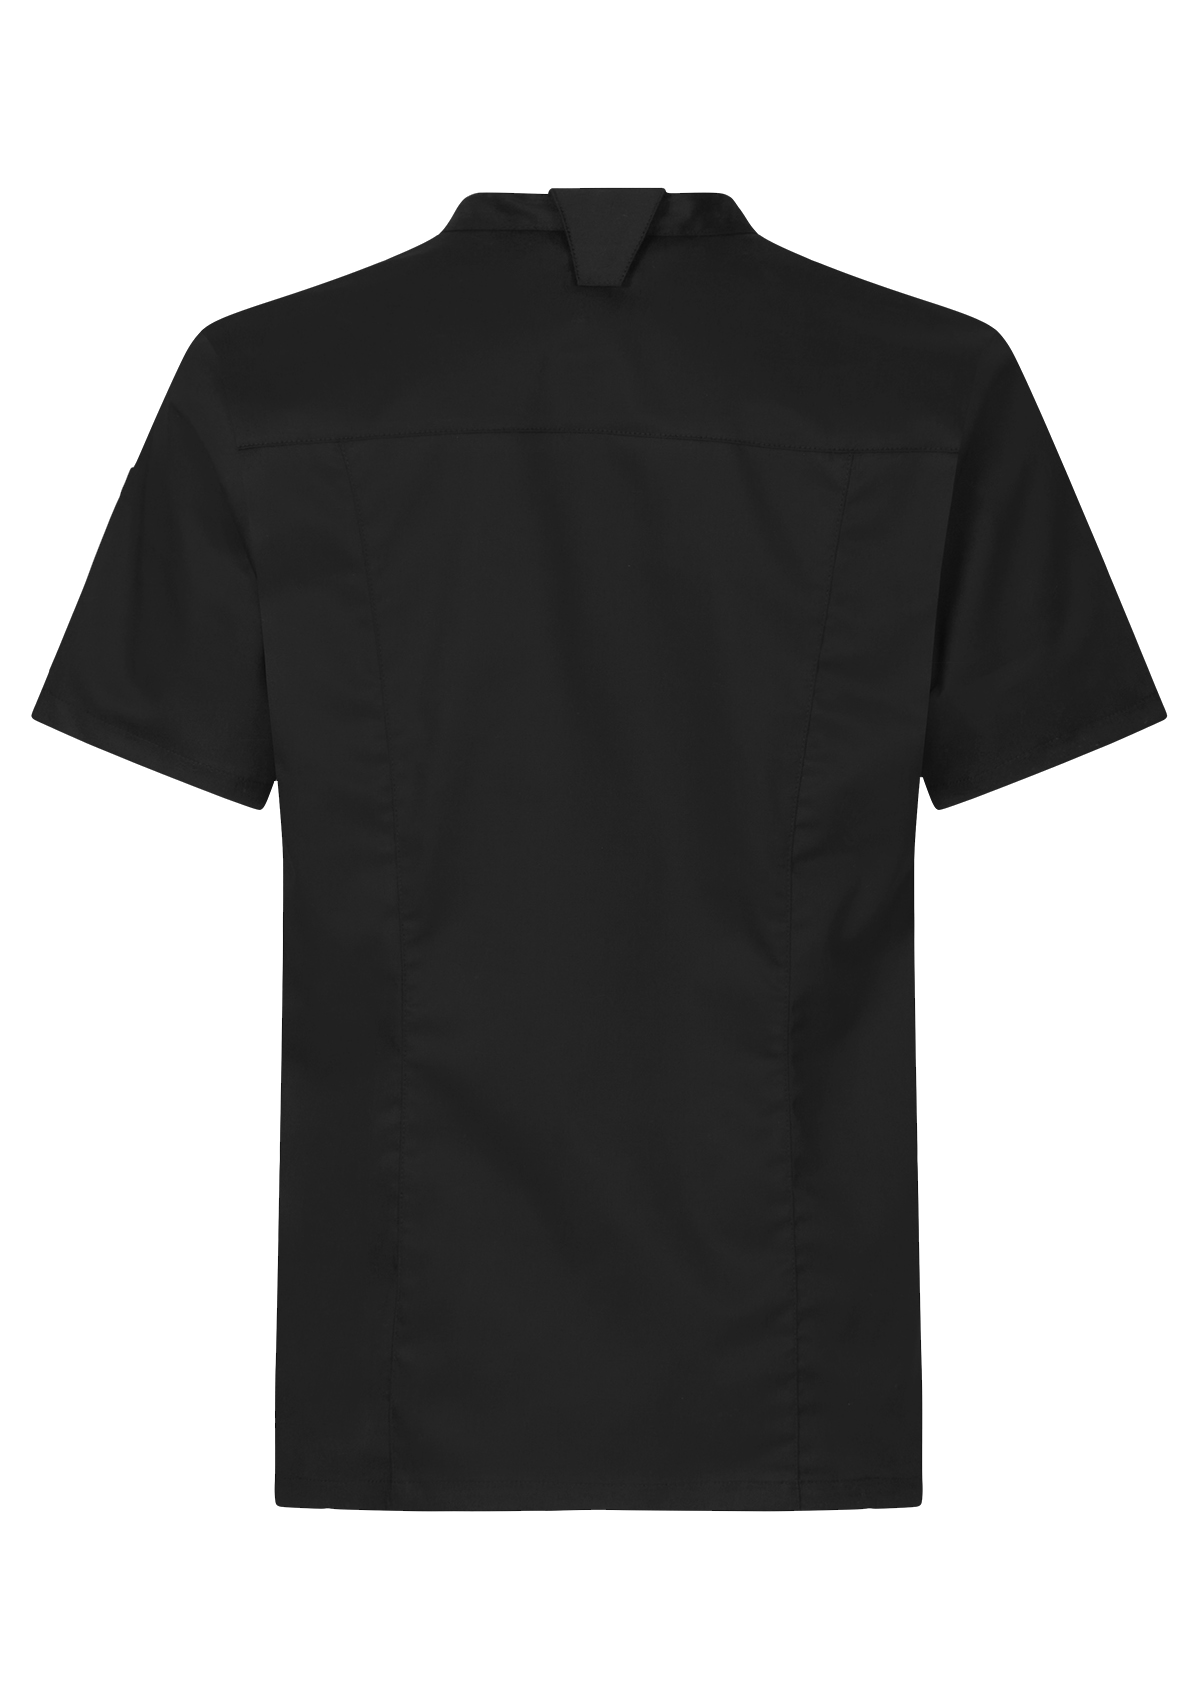 Unisex Chef's Shirt in Low-environmental Impact Stretch Fabric